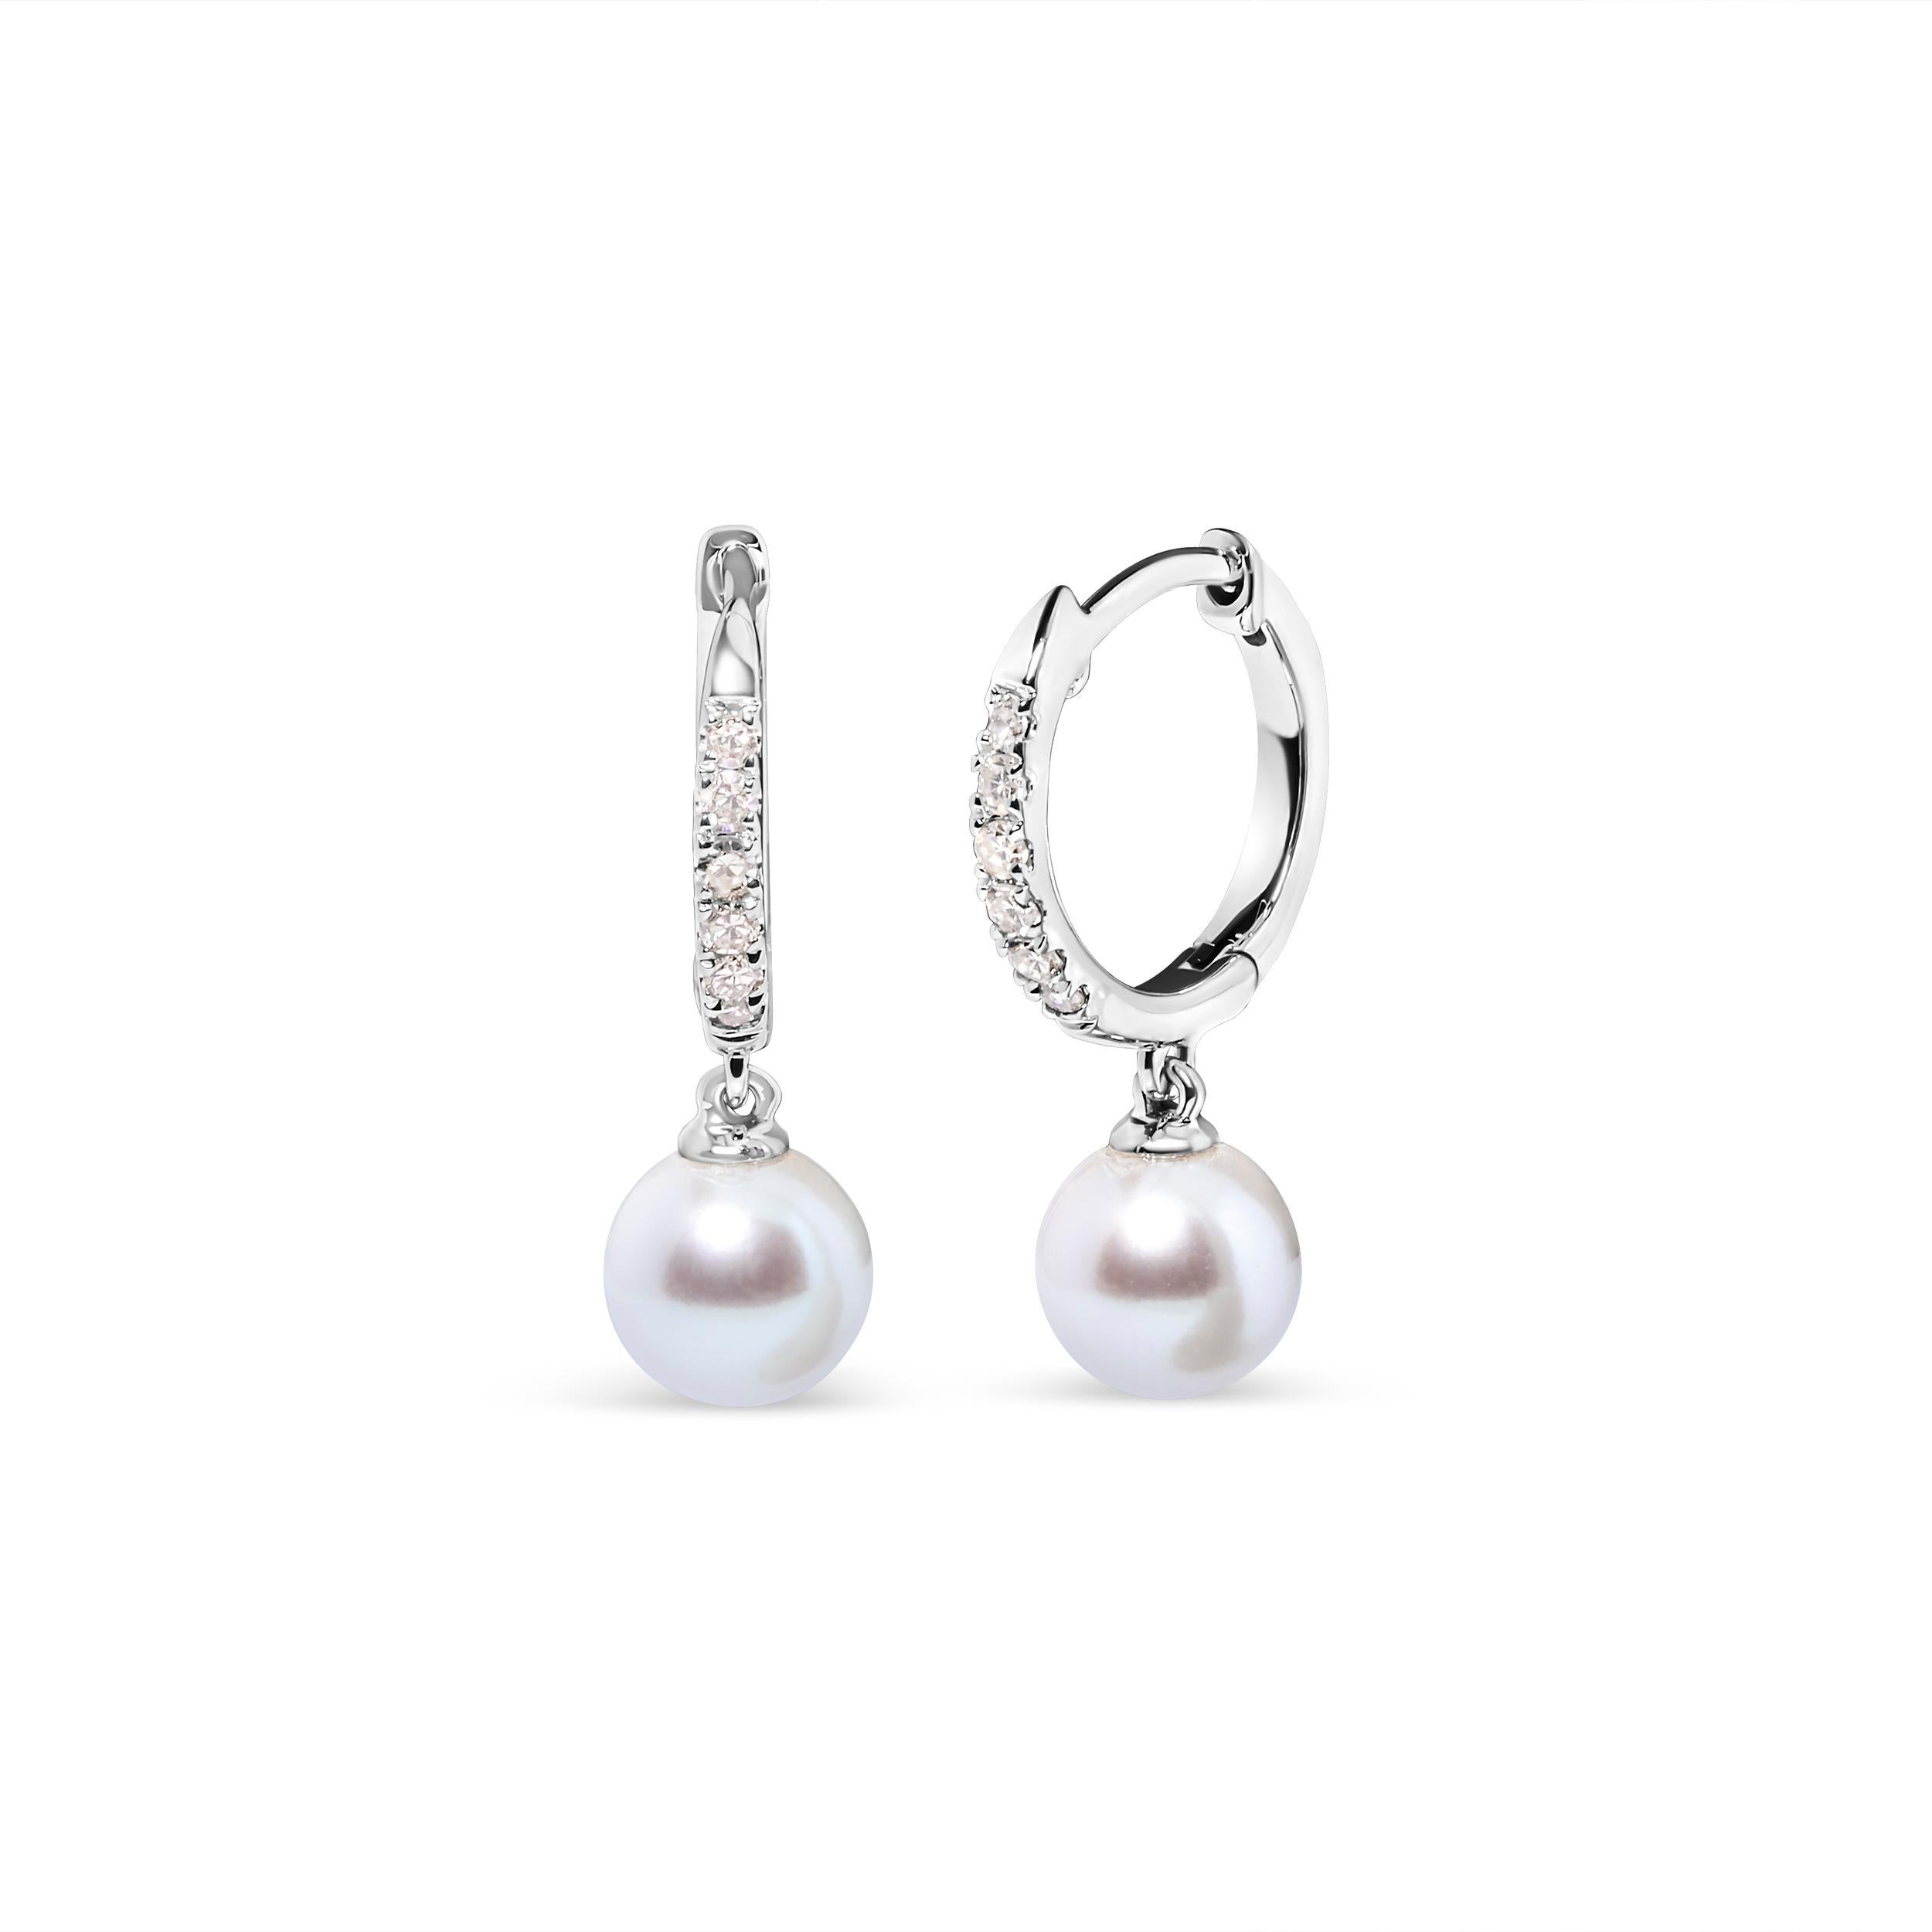 Introducing a captivating masterpiece for women who seek elegance and sophistication. These exquisite pearl drop earrings feature a dazzling array of 12 round diamonds accented. The diamonds, sourced from nature, boast a brilliant H-I color and are